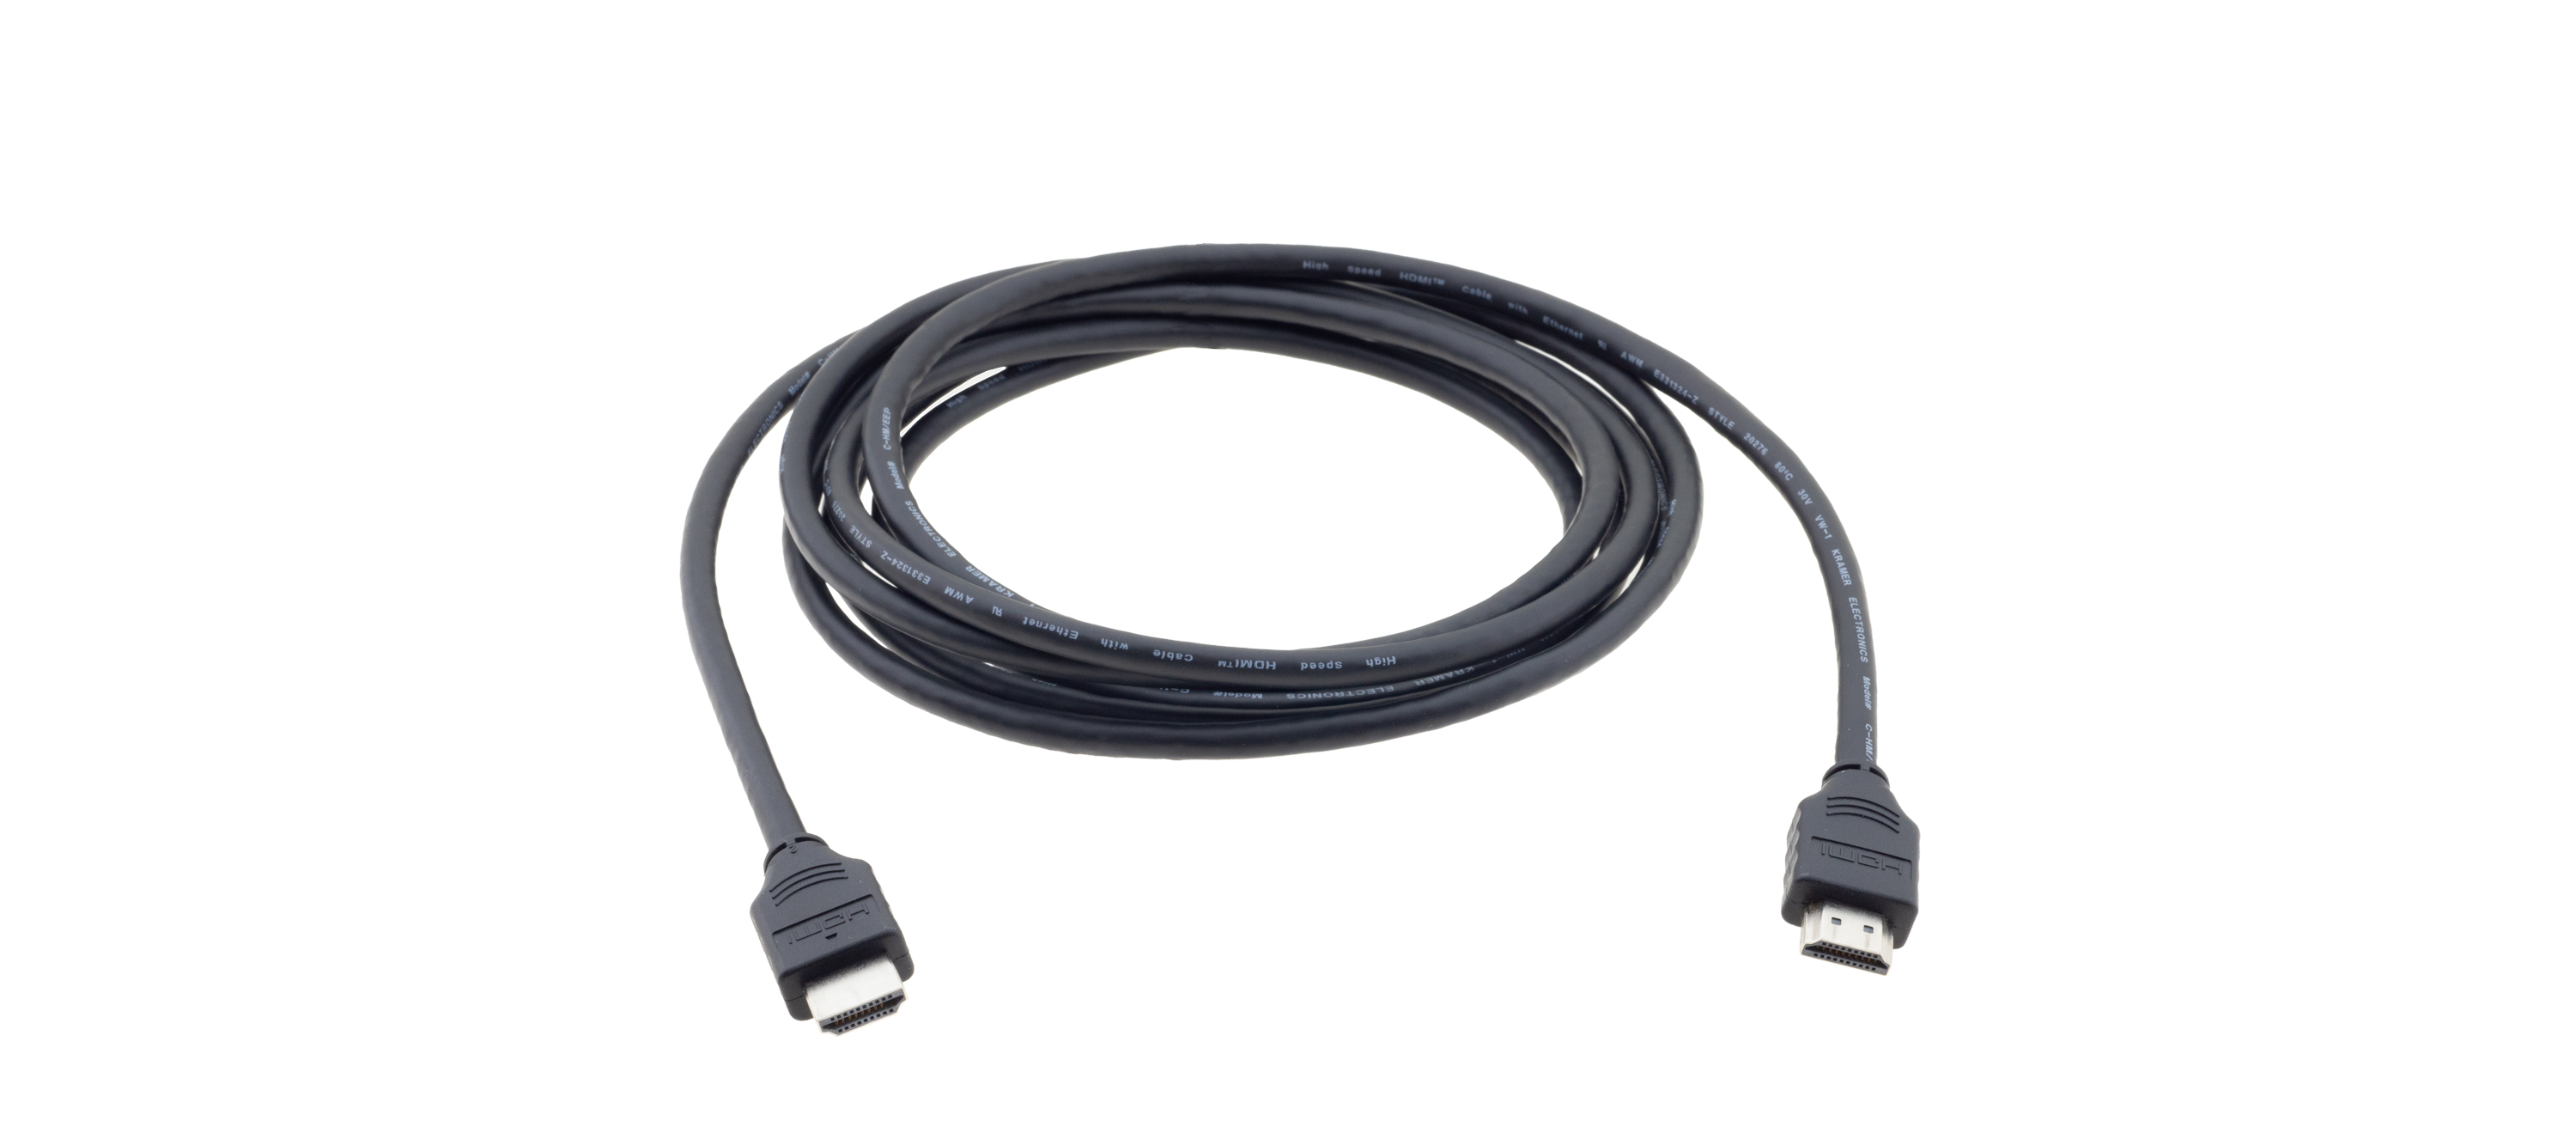 C-HM/EEP-3 High speed HDMI cable with Ethernet Cable (3')